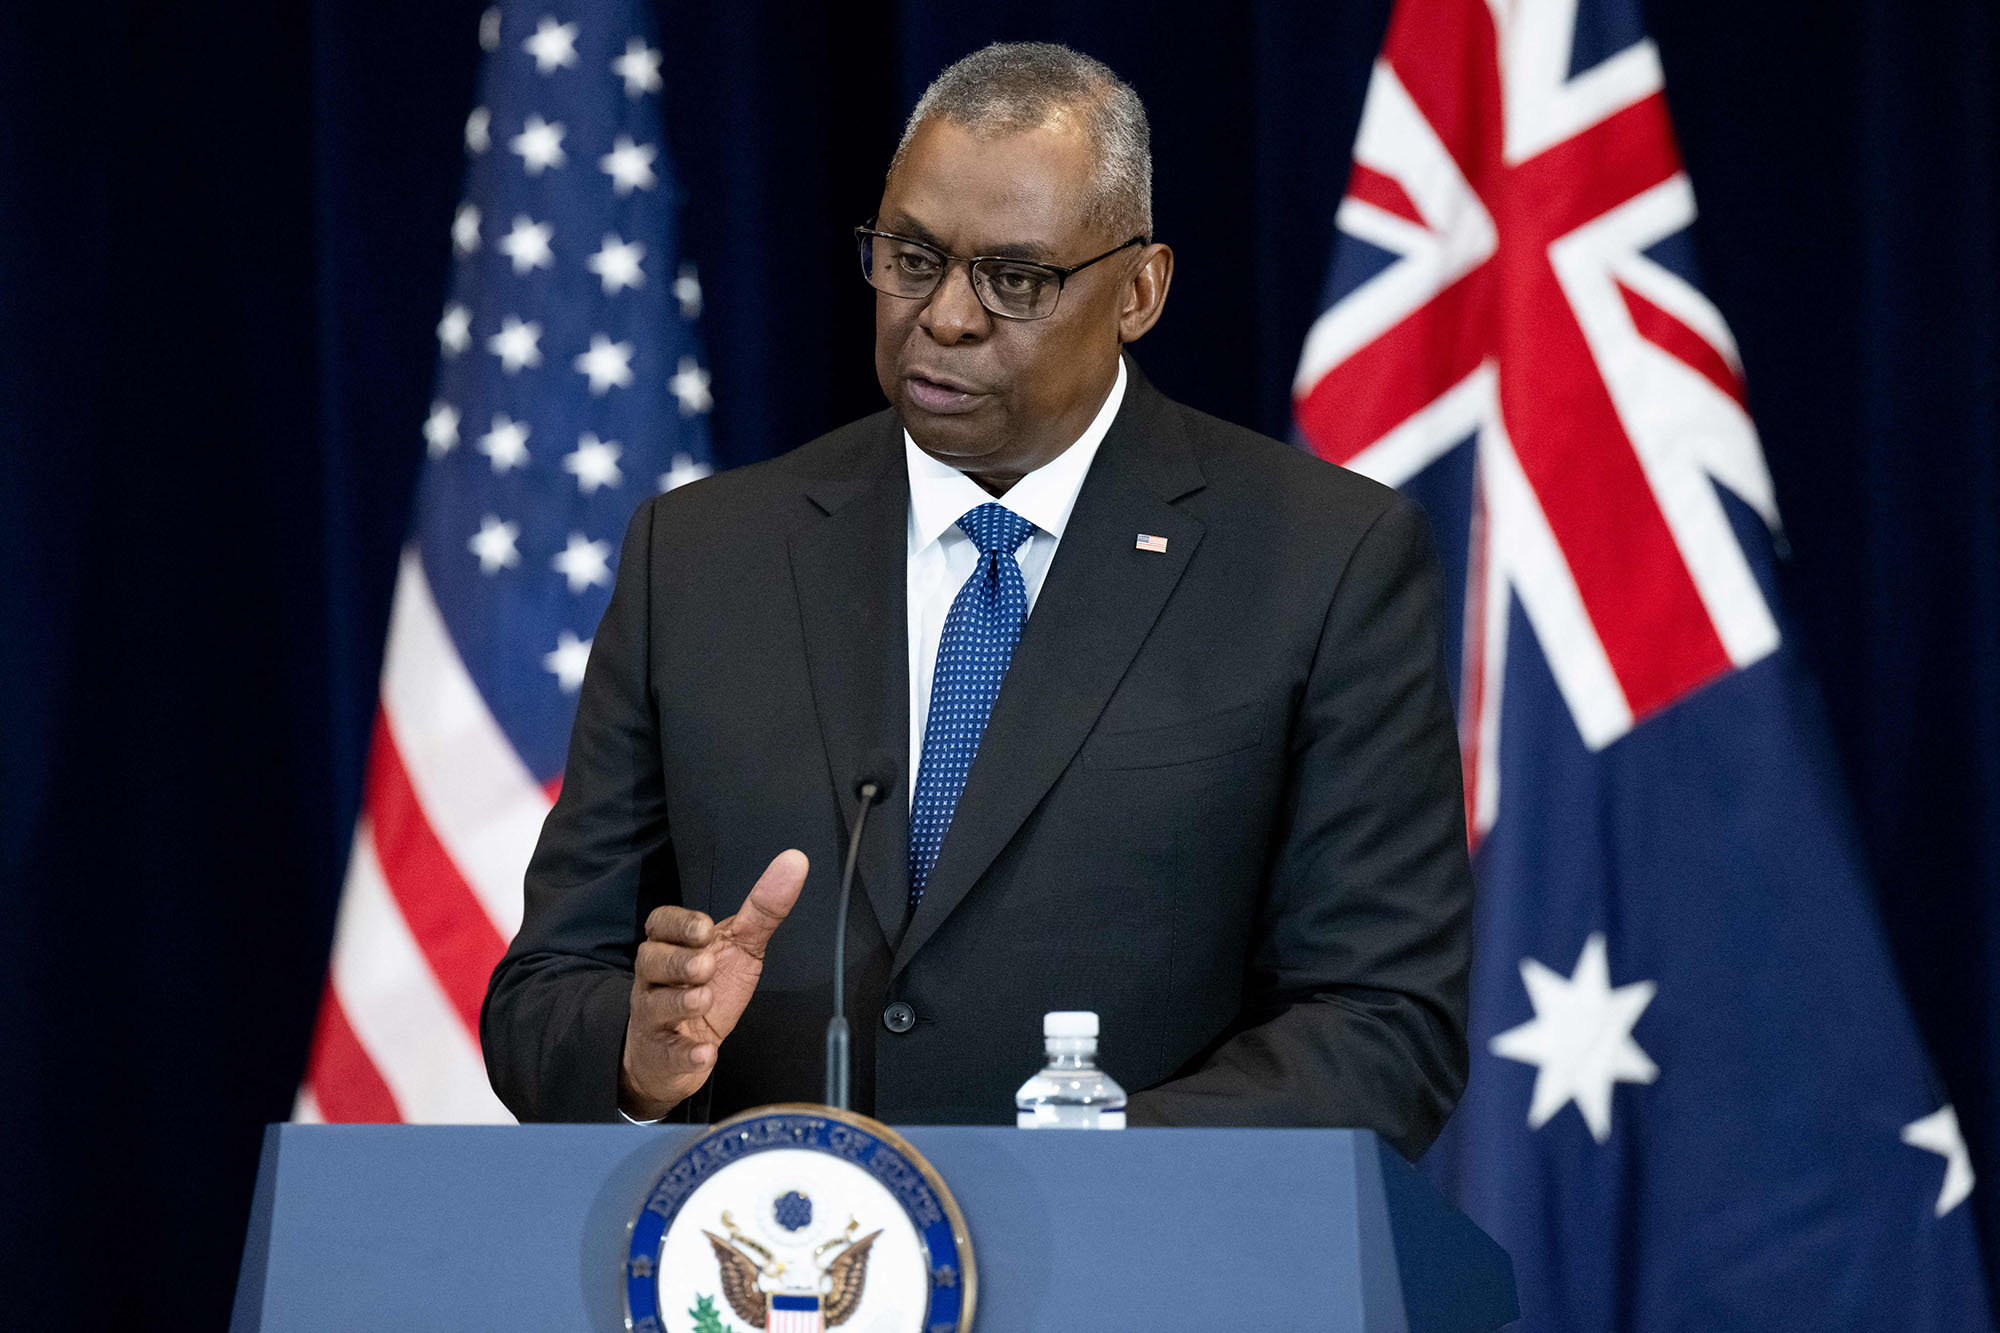 US Secretary of Defense Lloyd Austin speaks at a press conference during the 32nd annual Australia - US Ministerial (AUSMIN) consultations at the State Department in Washington D.C, on December 6.